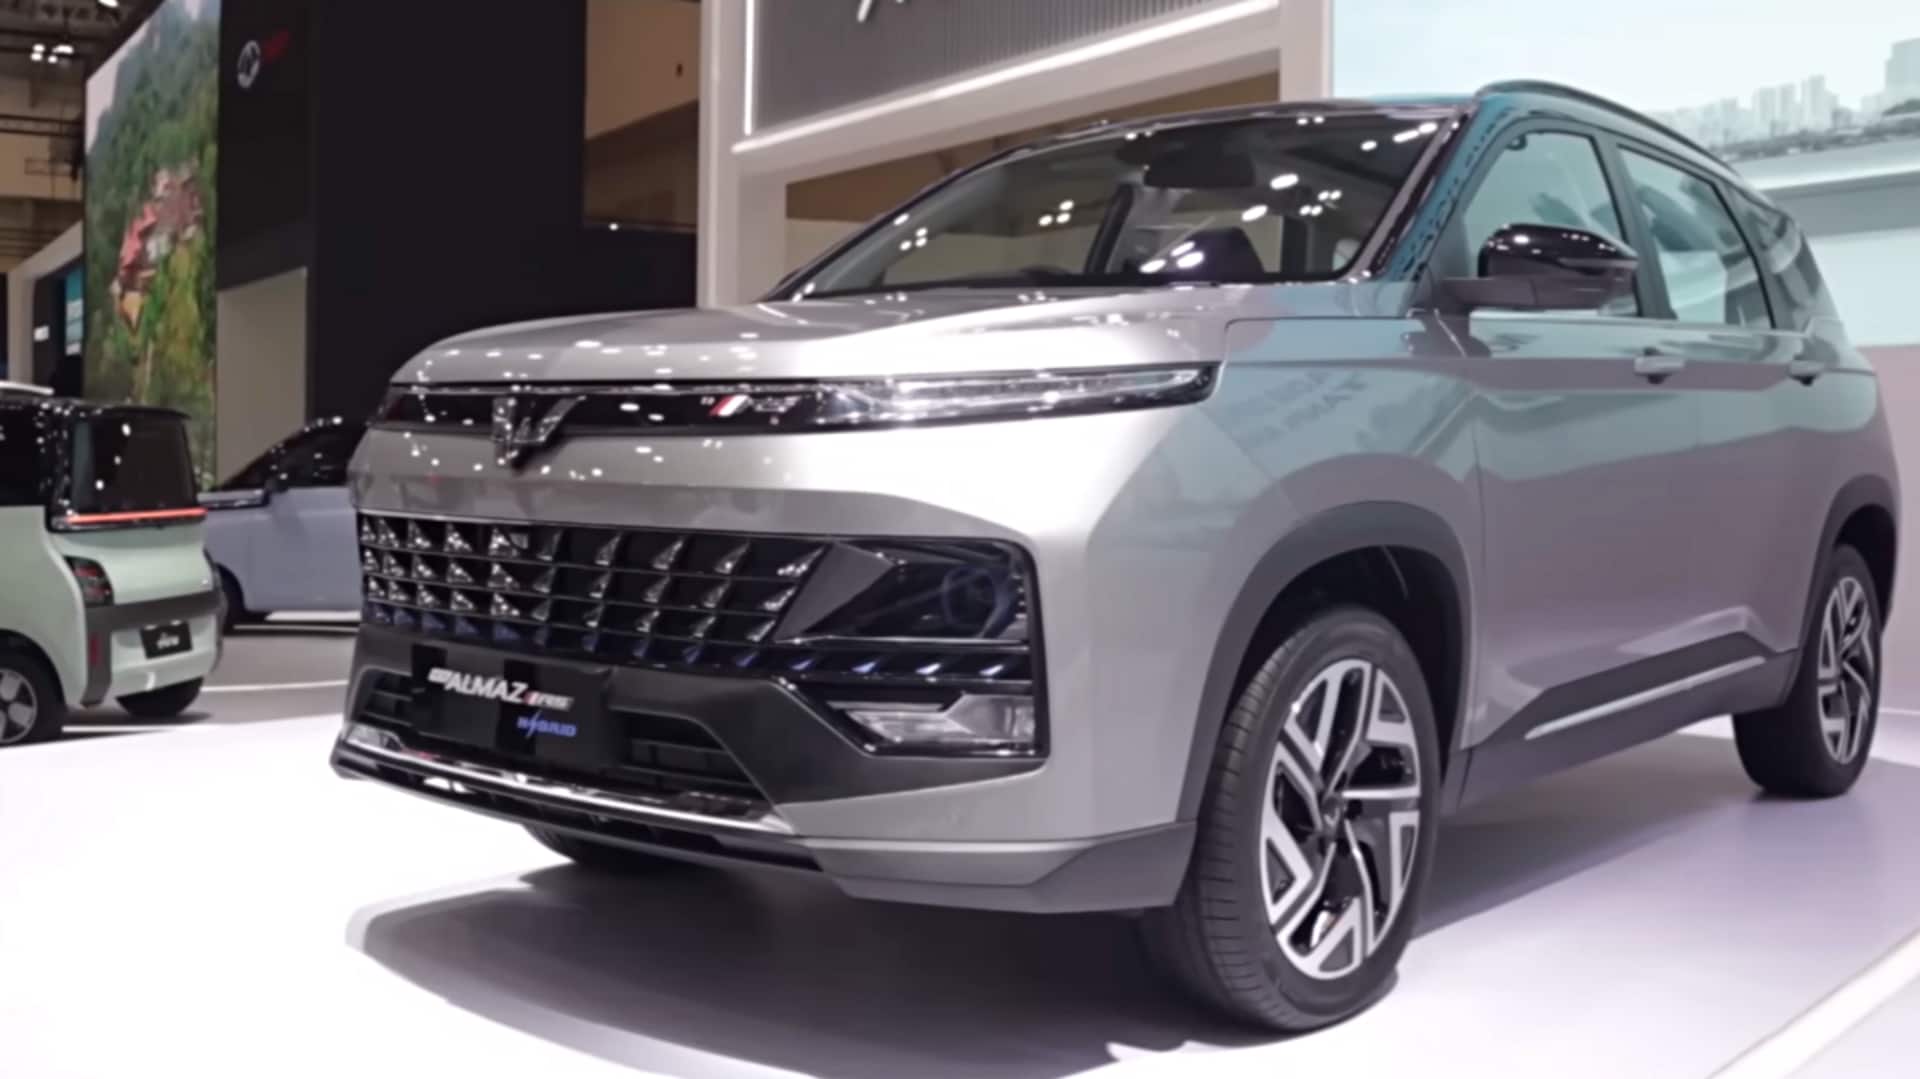 New Wuling Almaz RS is the India-bound MG Hector (facelift)